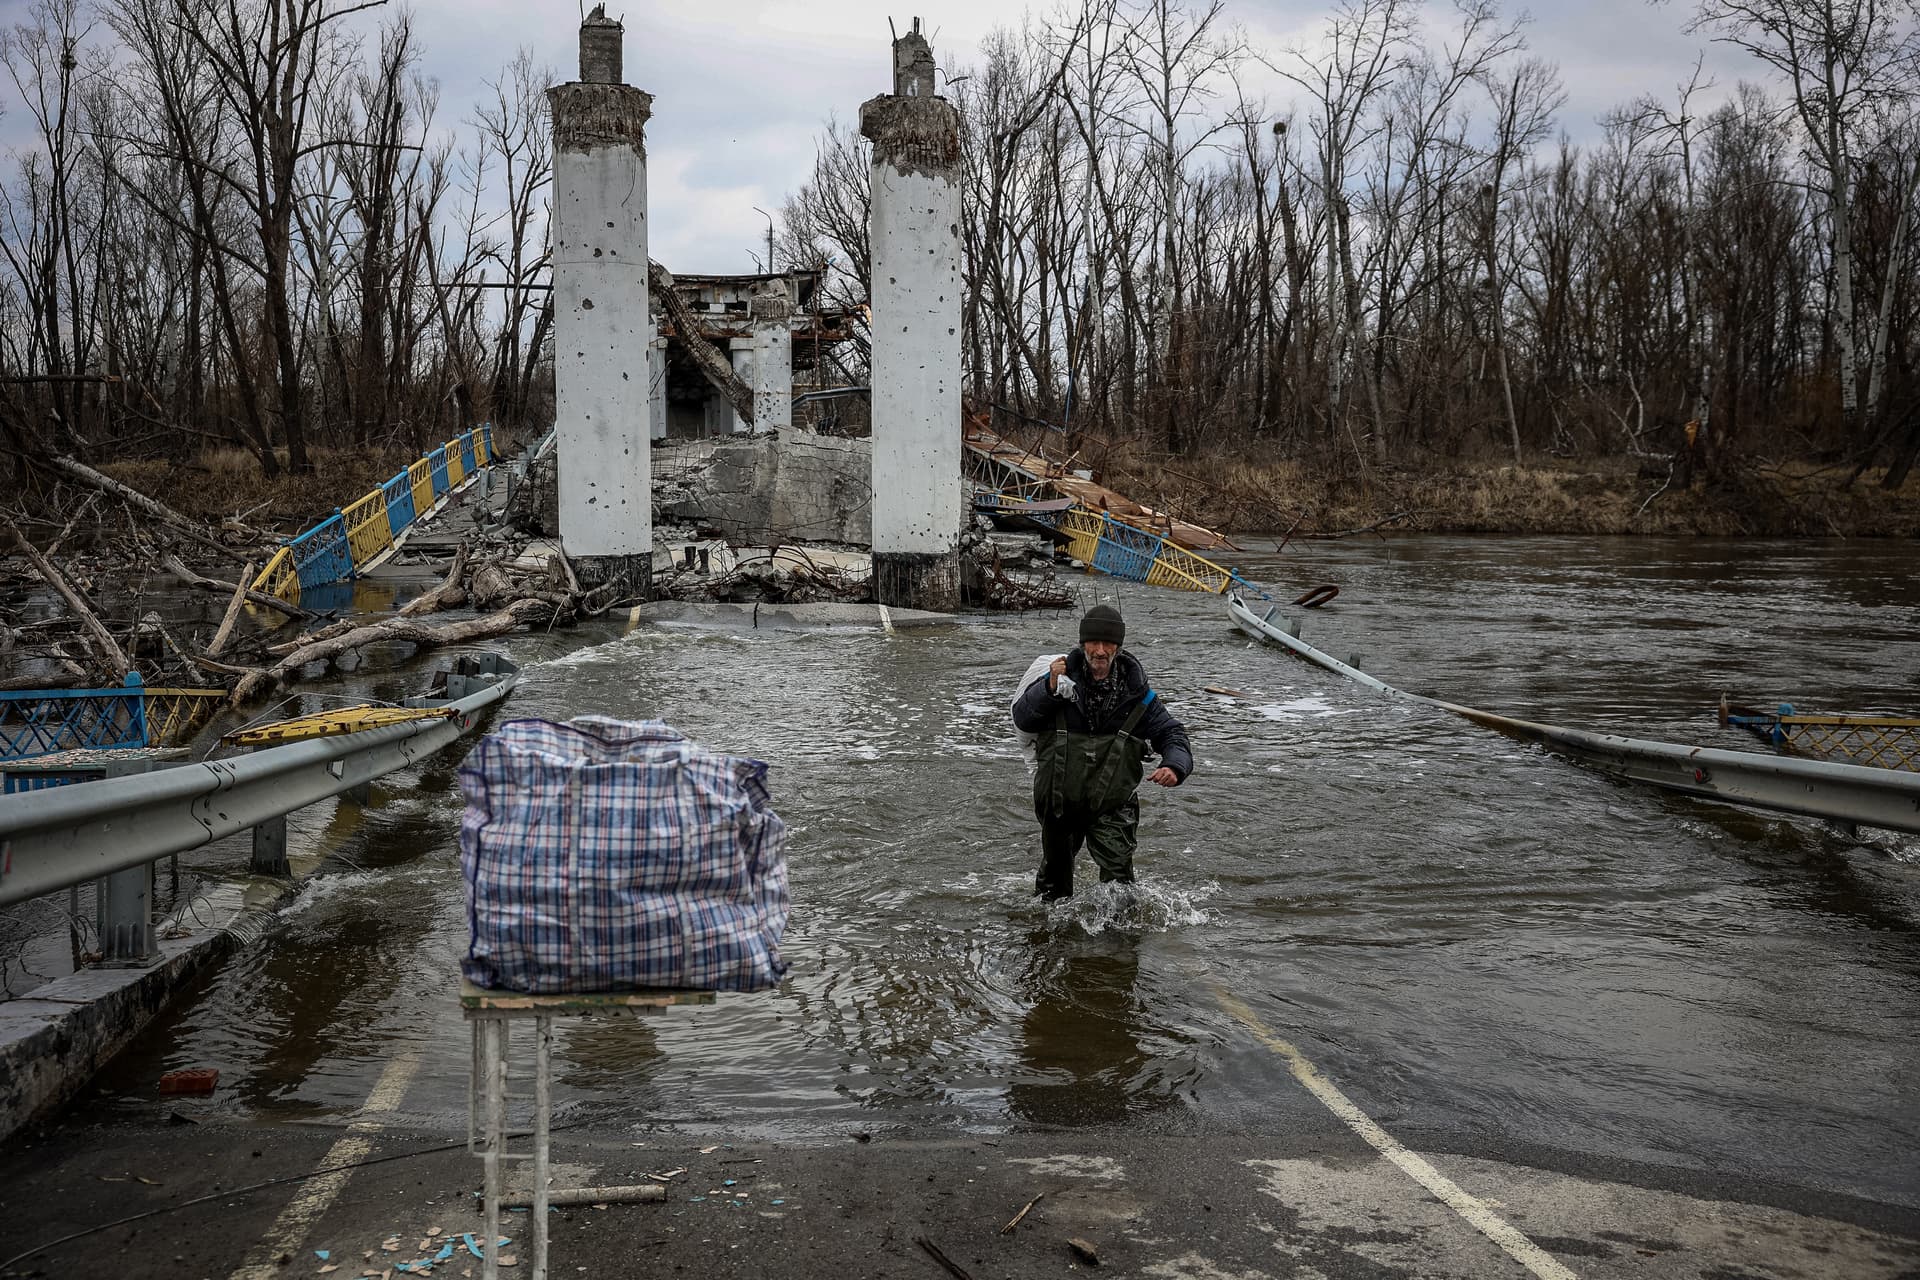 A resident of the village of Bohorodychne crosses the Siversky Donets River over a destroyed bridge to get bread from the other bank, in Bohorodychne village